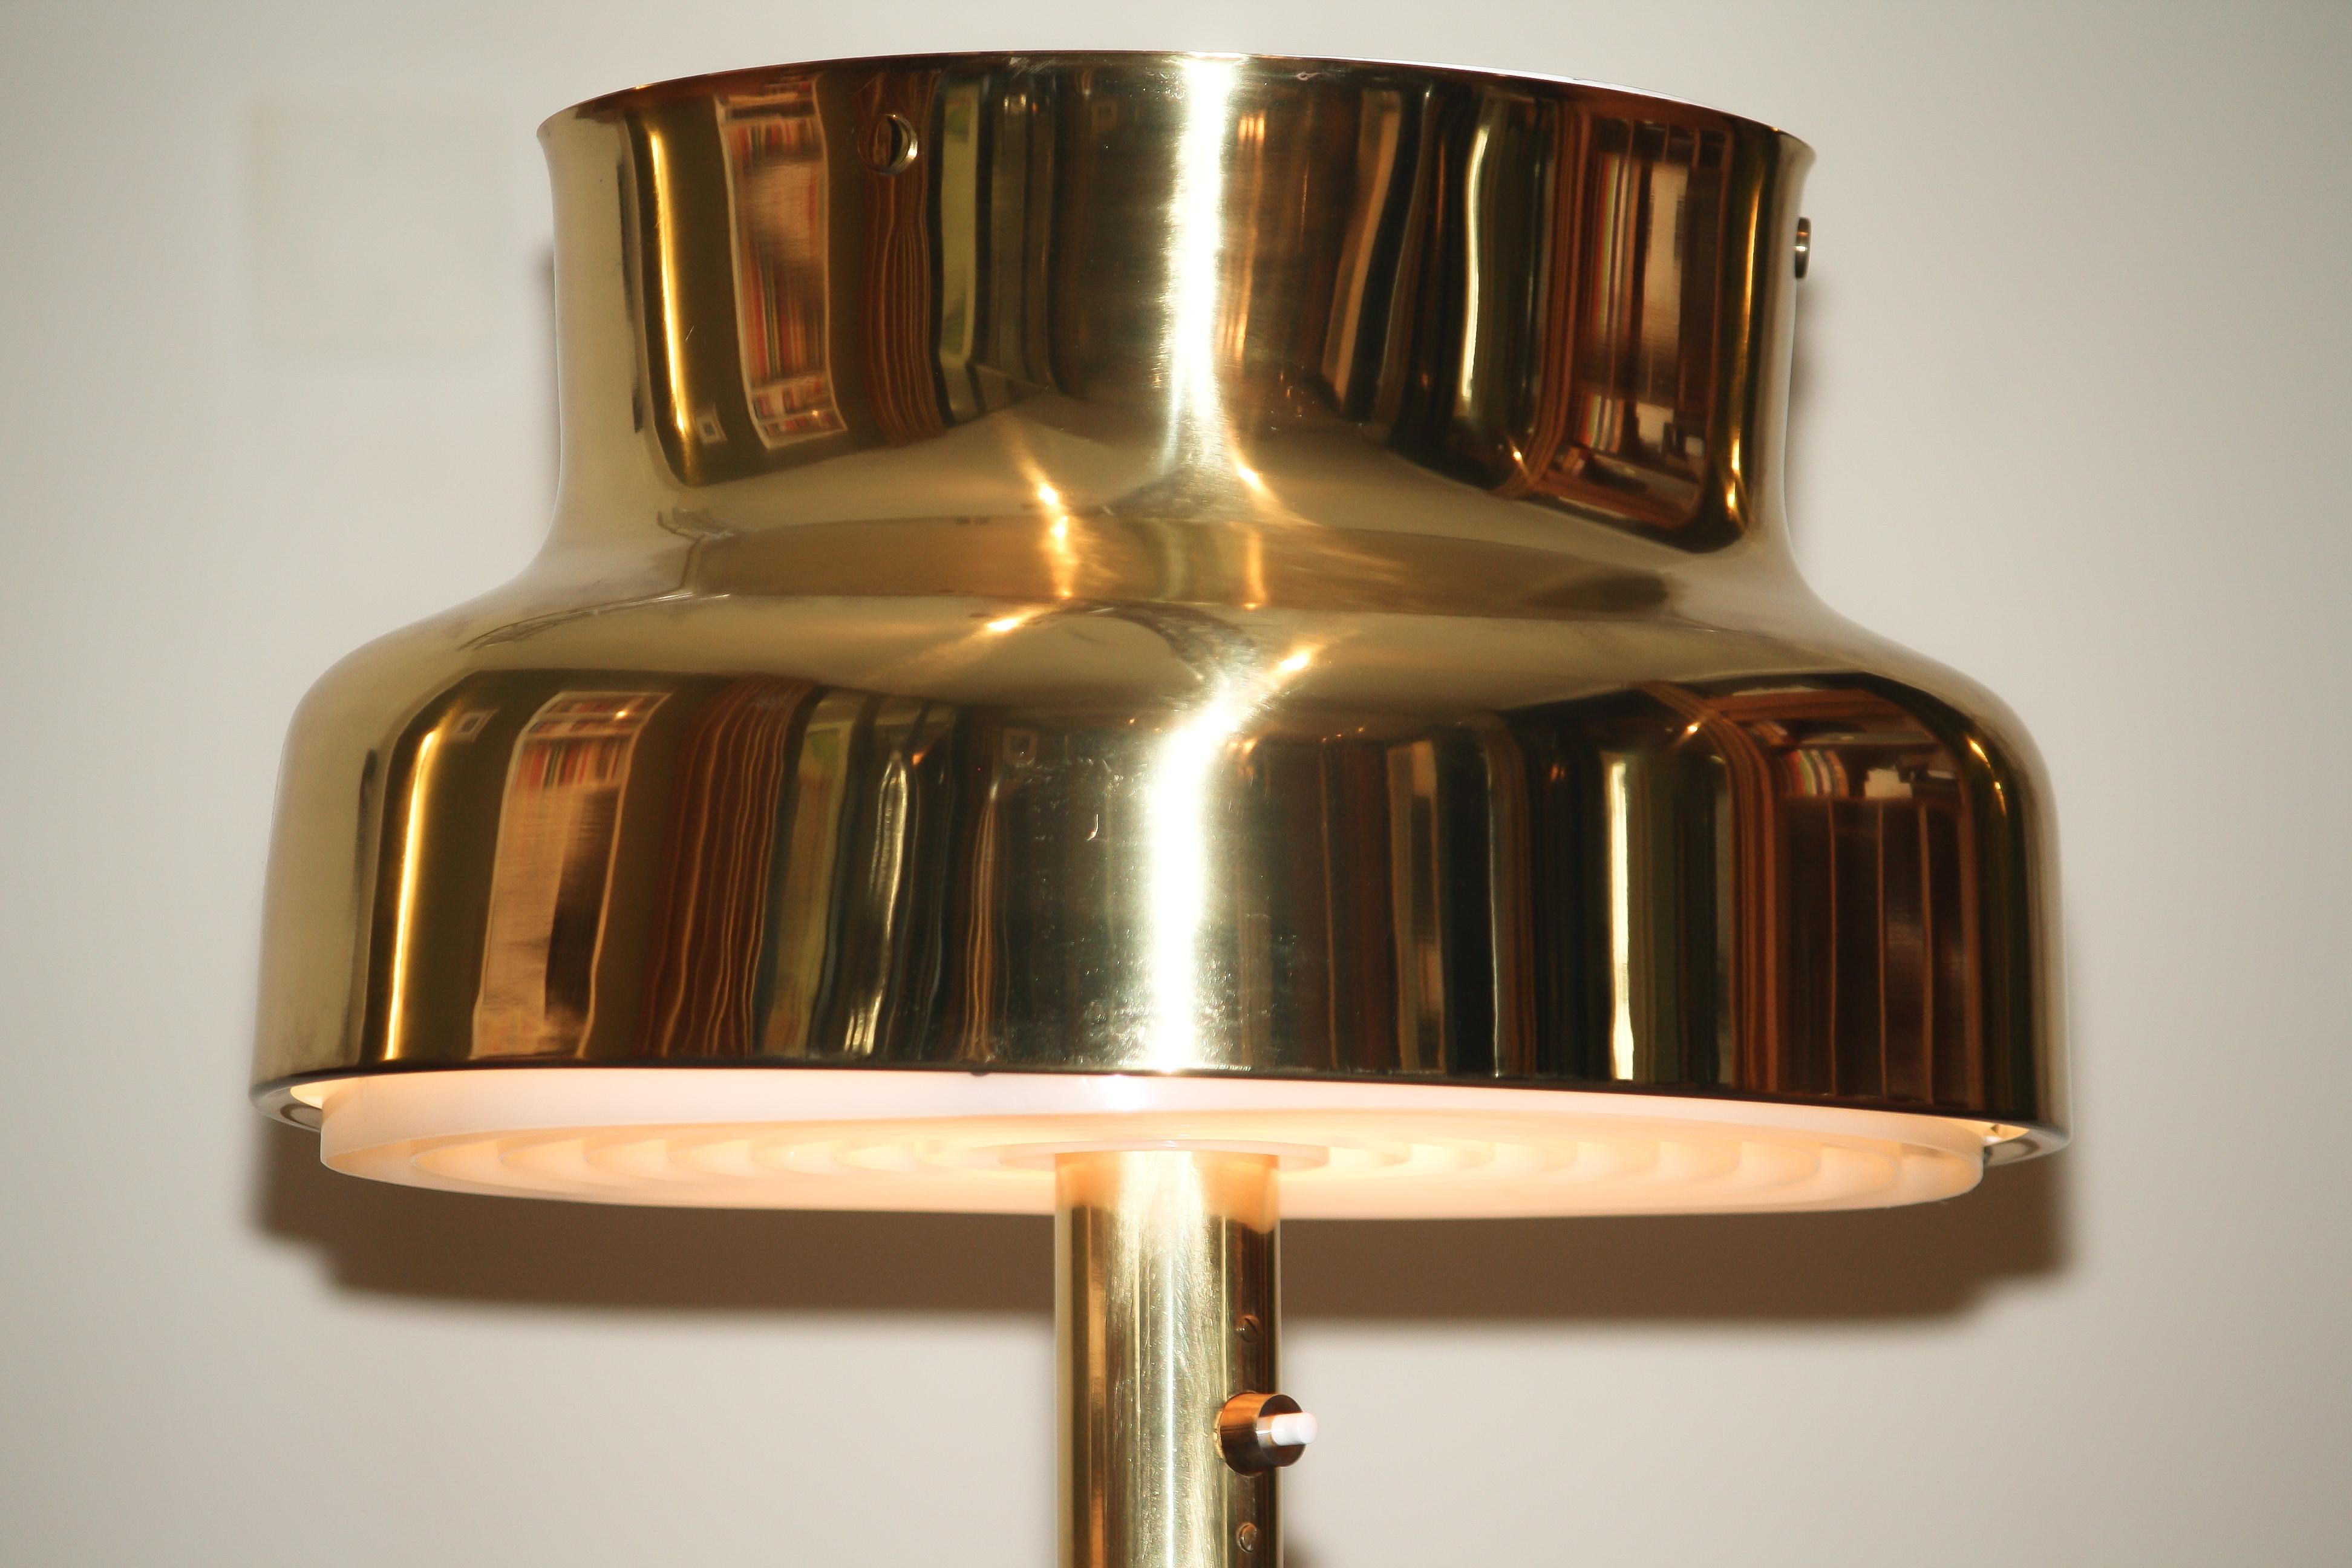 Swedish 1960s Golden or Brass Floor Lamp by Anders Pehrson ‘Bumling’ for Ateljé Lyktan